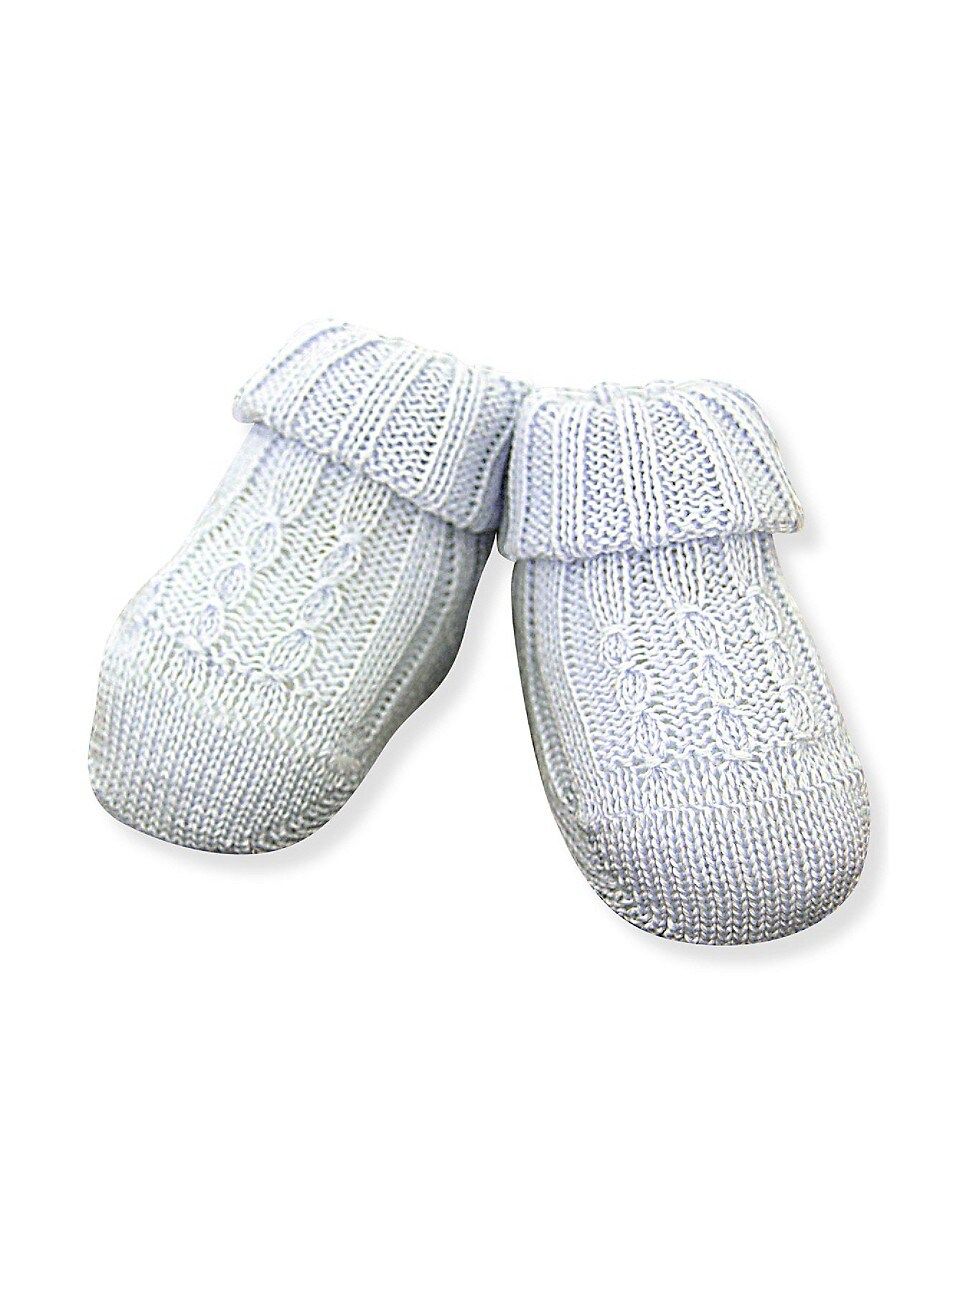 Baby's Cable-Knit Booties | Saks Fifth Avenue